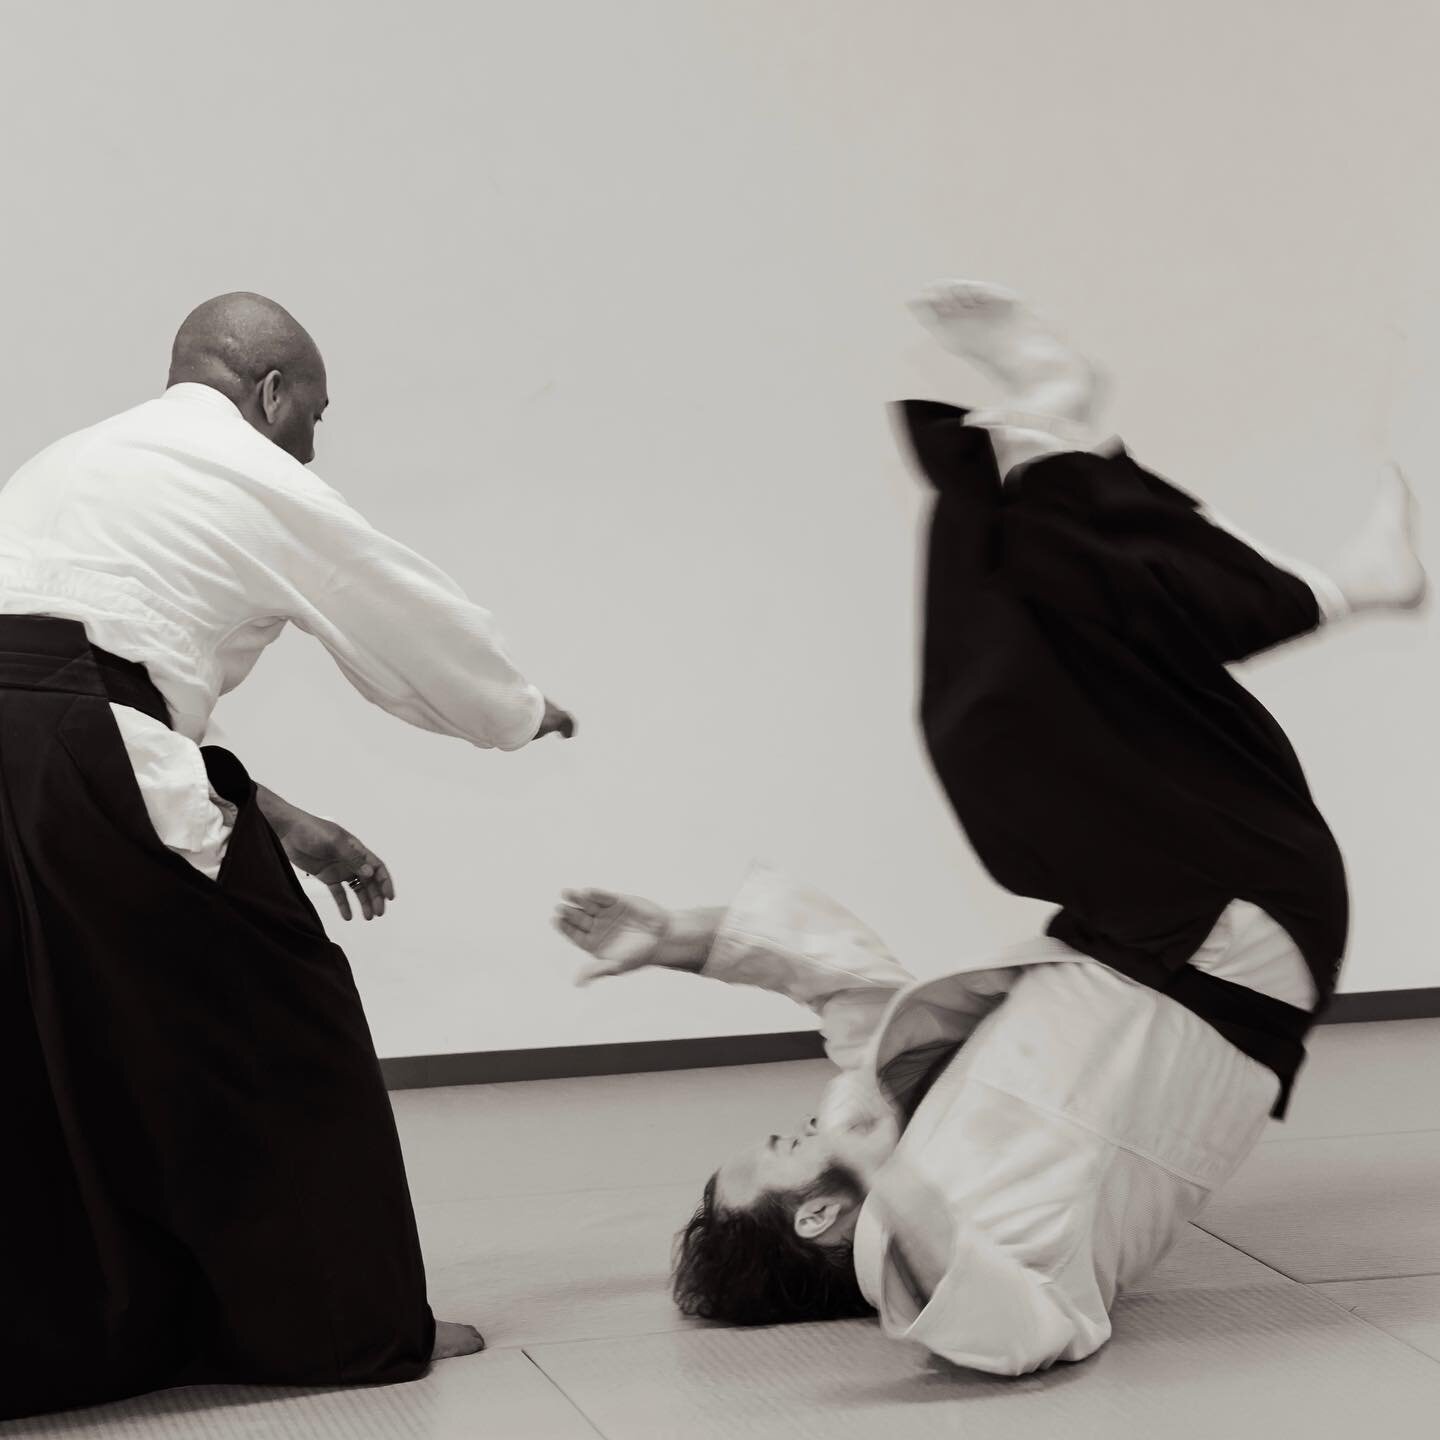 Select pictures from our Dojo&rsquo;s 18th Anniversary Celebration and Training featuring founder Asim Hanif Sensei 5th Dan of @valleyaikidoaz #aikido #training #exercise #workout #keepworking #fitness #martialarts  #bushido #celebration #anniversary